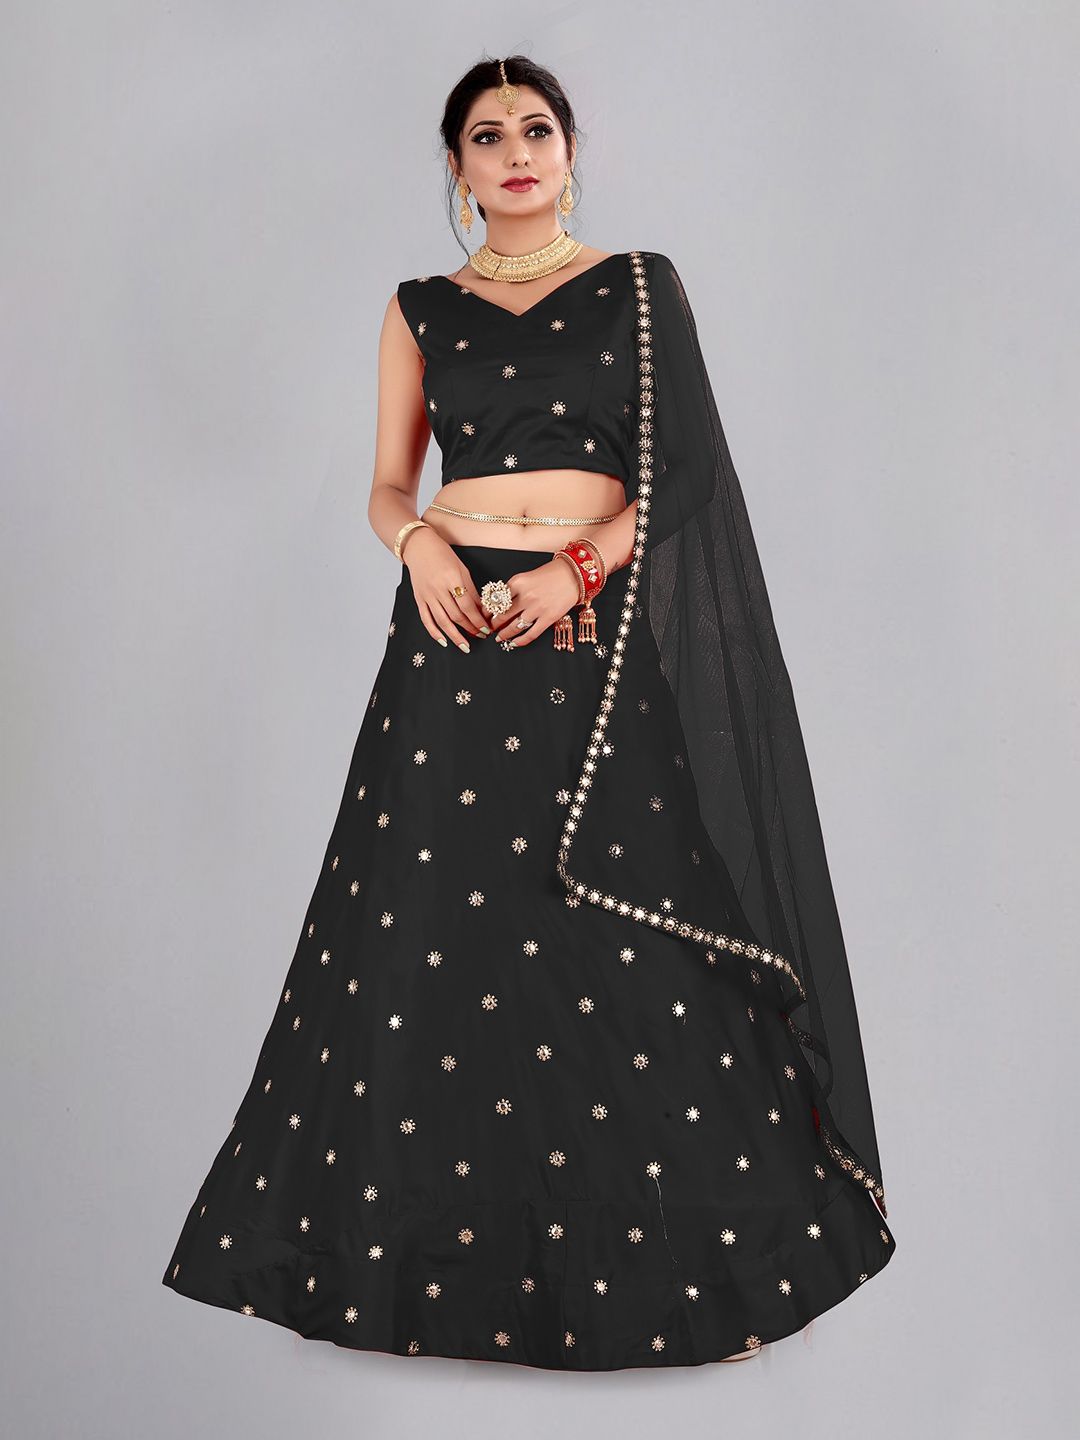 Atsevam Black & Gold-Toned Embellished Mirror Work Semi-Stitched Lehenga & Unstitched Blouse With Dupatta Price in India